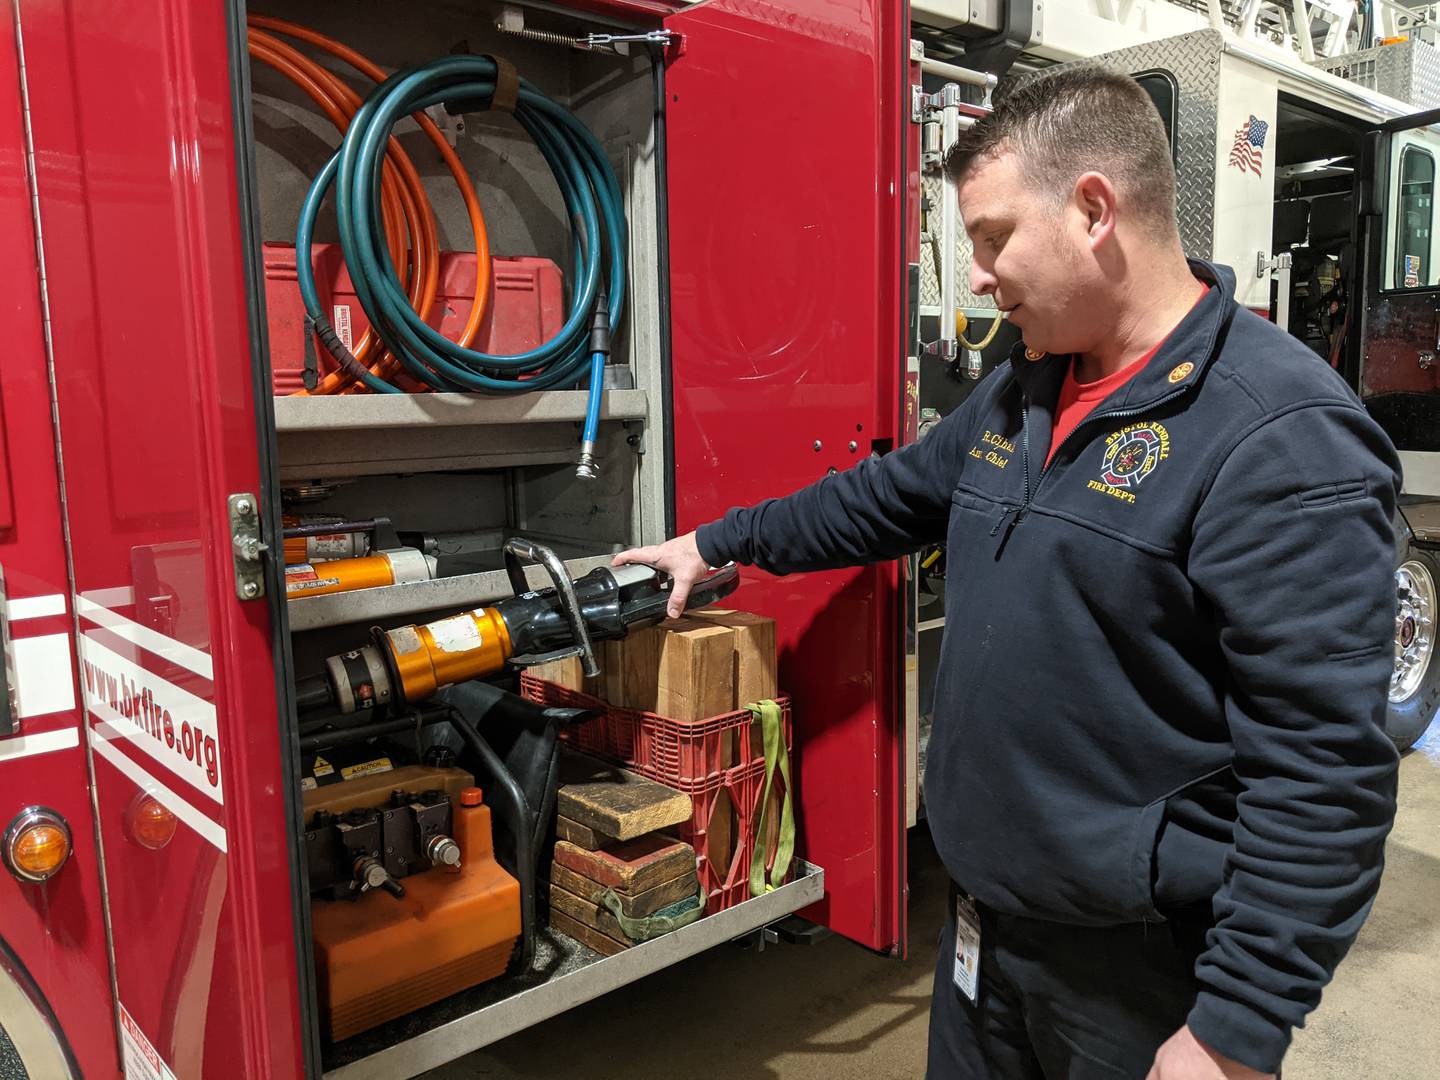 Bristol Kendall Fire Protection District Assistant Chief of Training and Safety Ryan Cihak shows some of the extrication tools on one of the department's fire trucks.